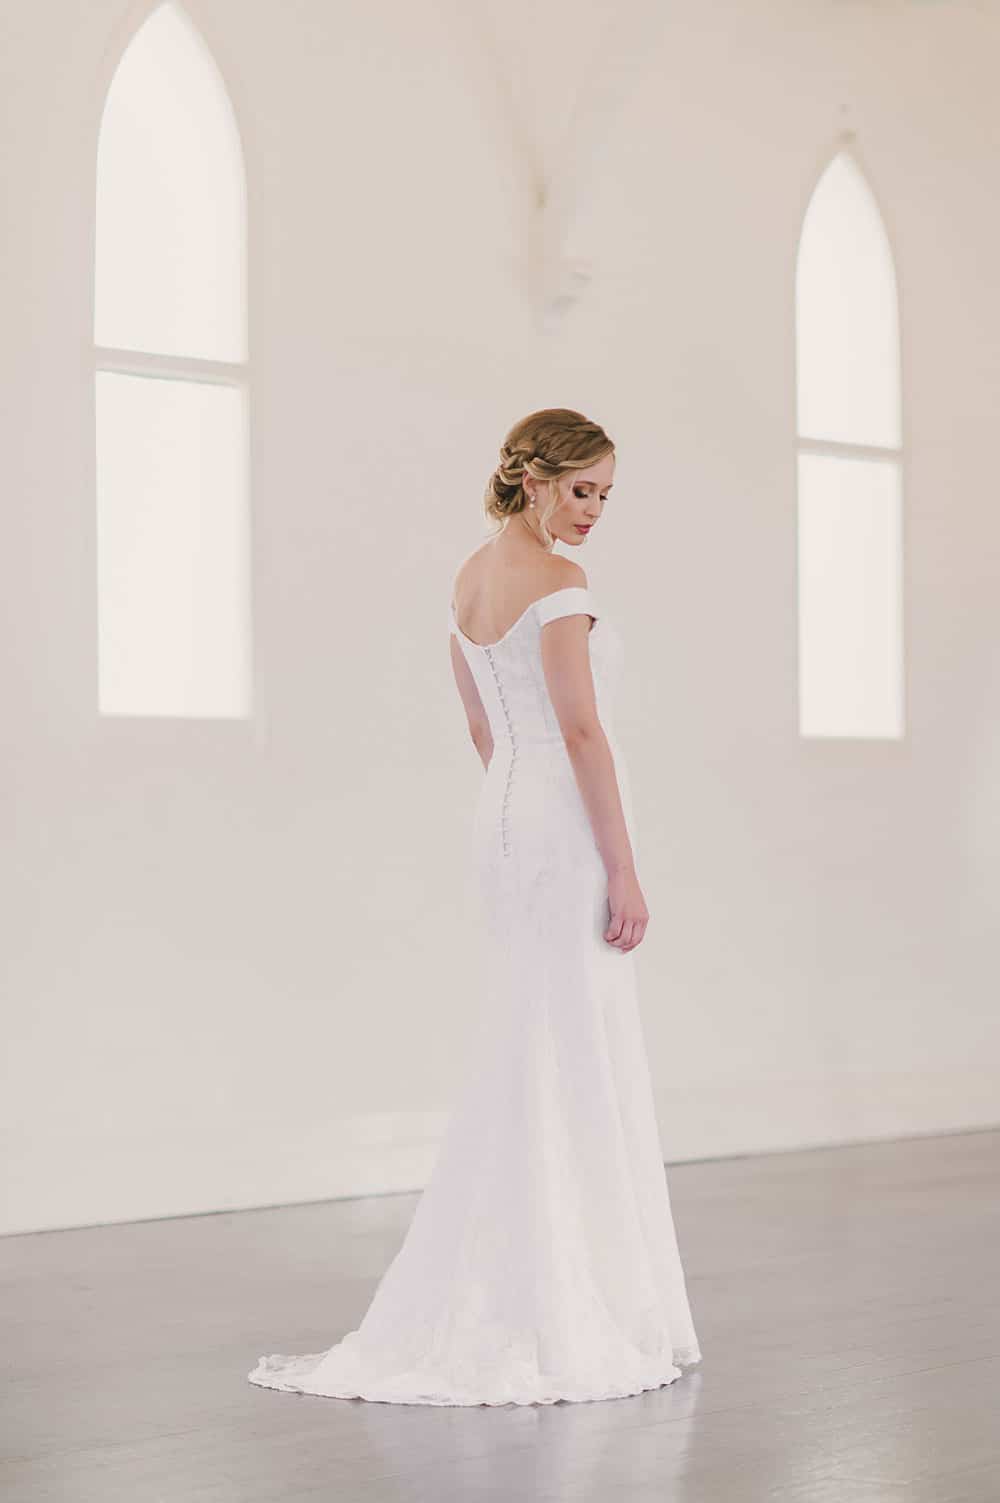 The Loren gown from Wendy Makin's Ready to Wear collection